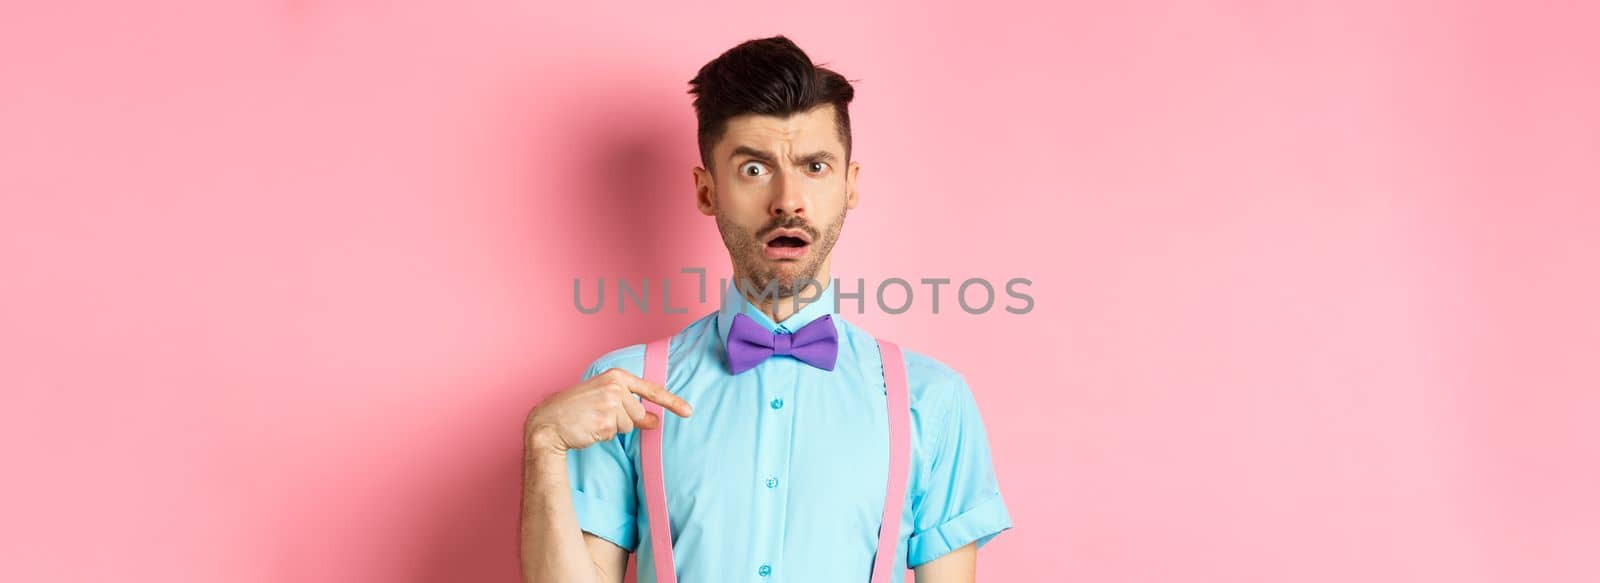 Image of confused funny guy in bow-tie and suspenders, pointing at himself as if being accused or chosen, raising eyebrow surprised, standing over pink background.